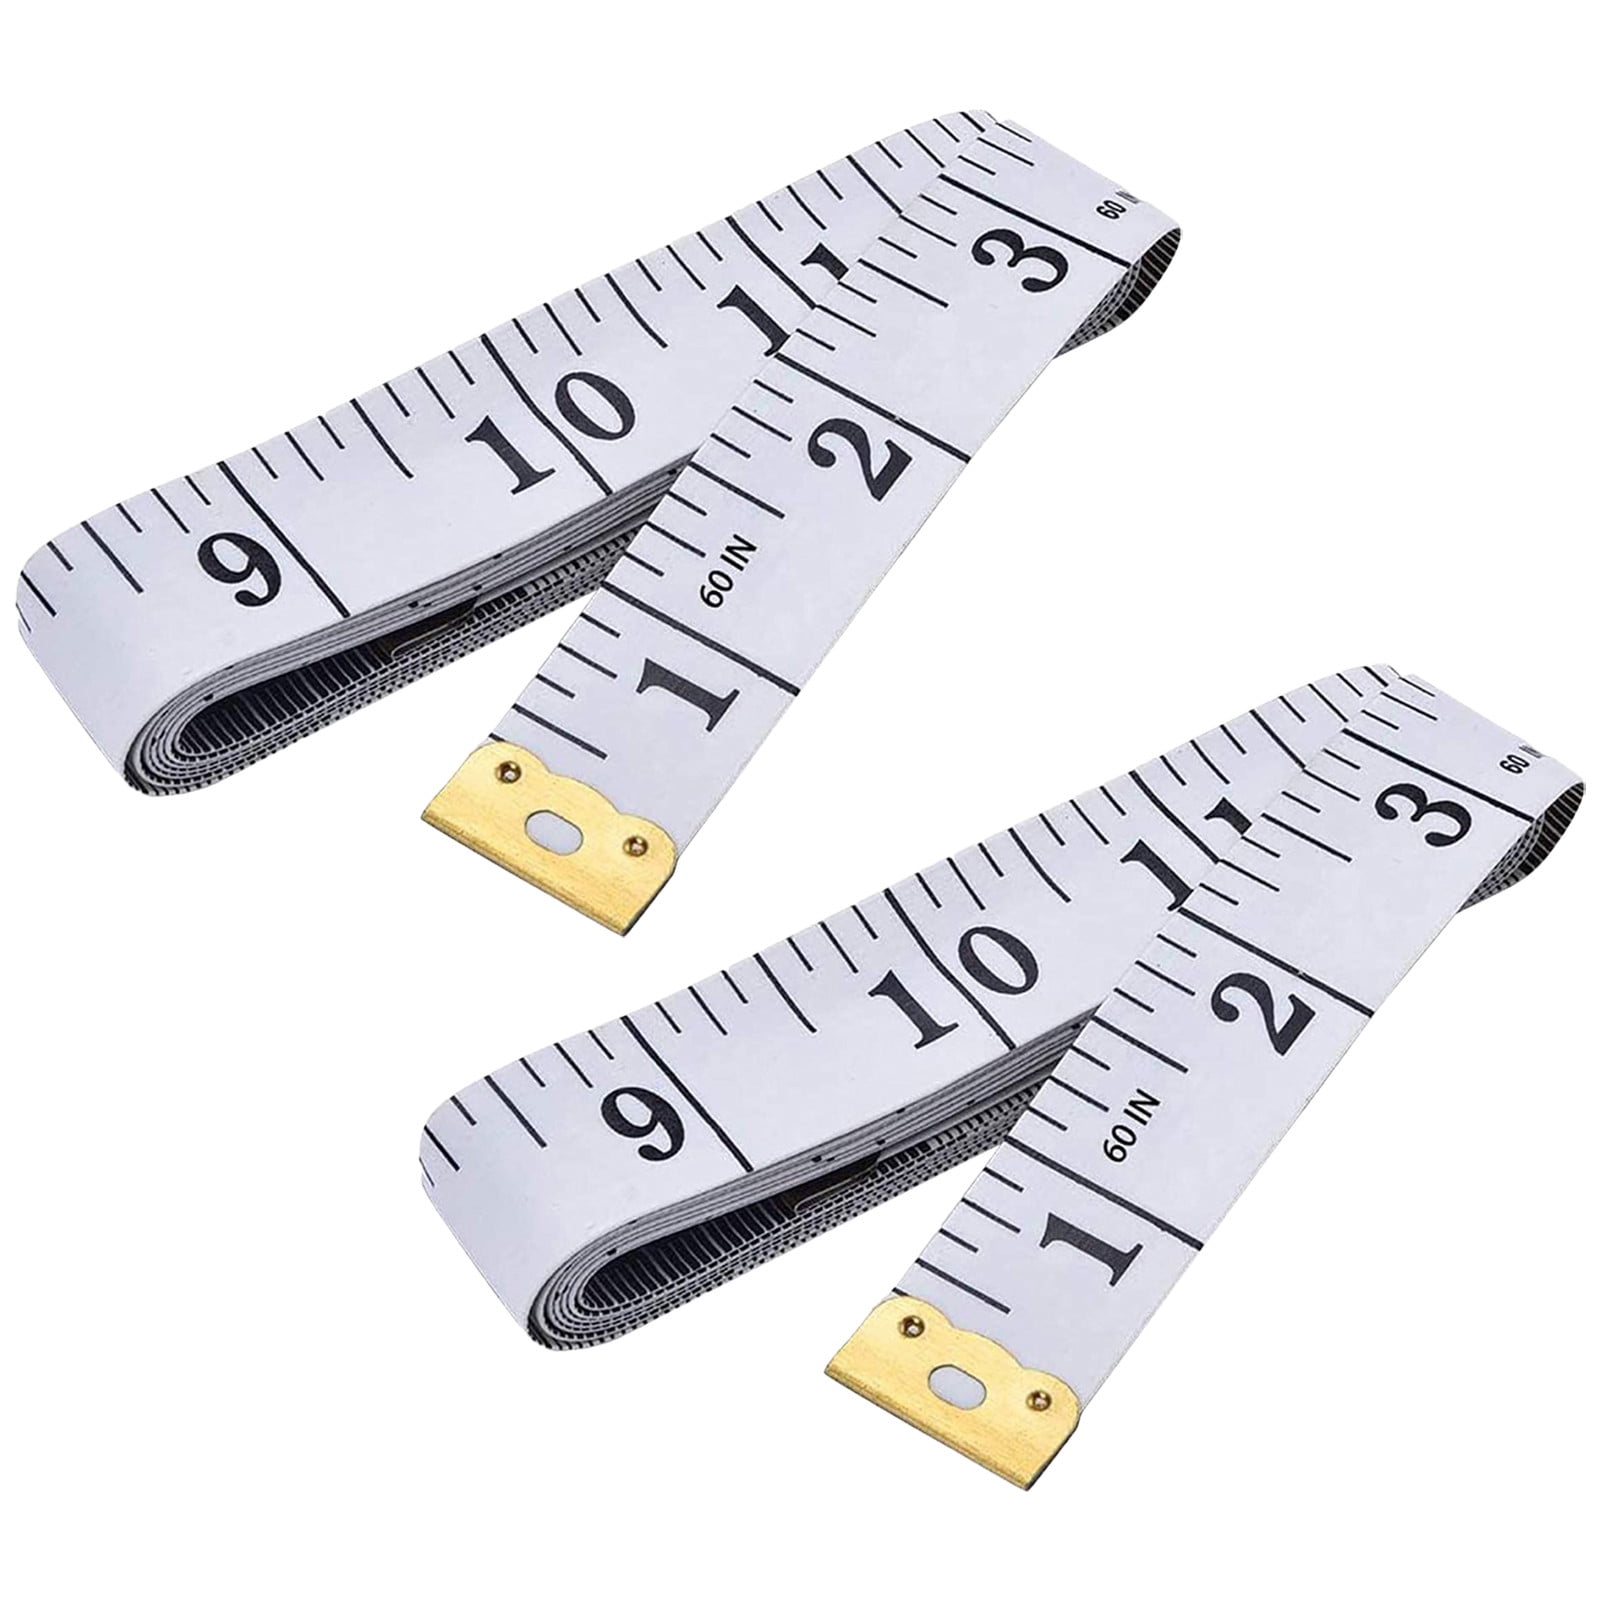  WEISHA Soft Tape Measure 1PC Double Scale Tape Ruler